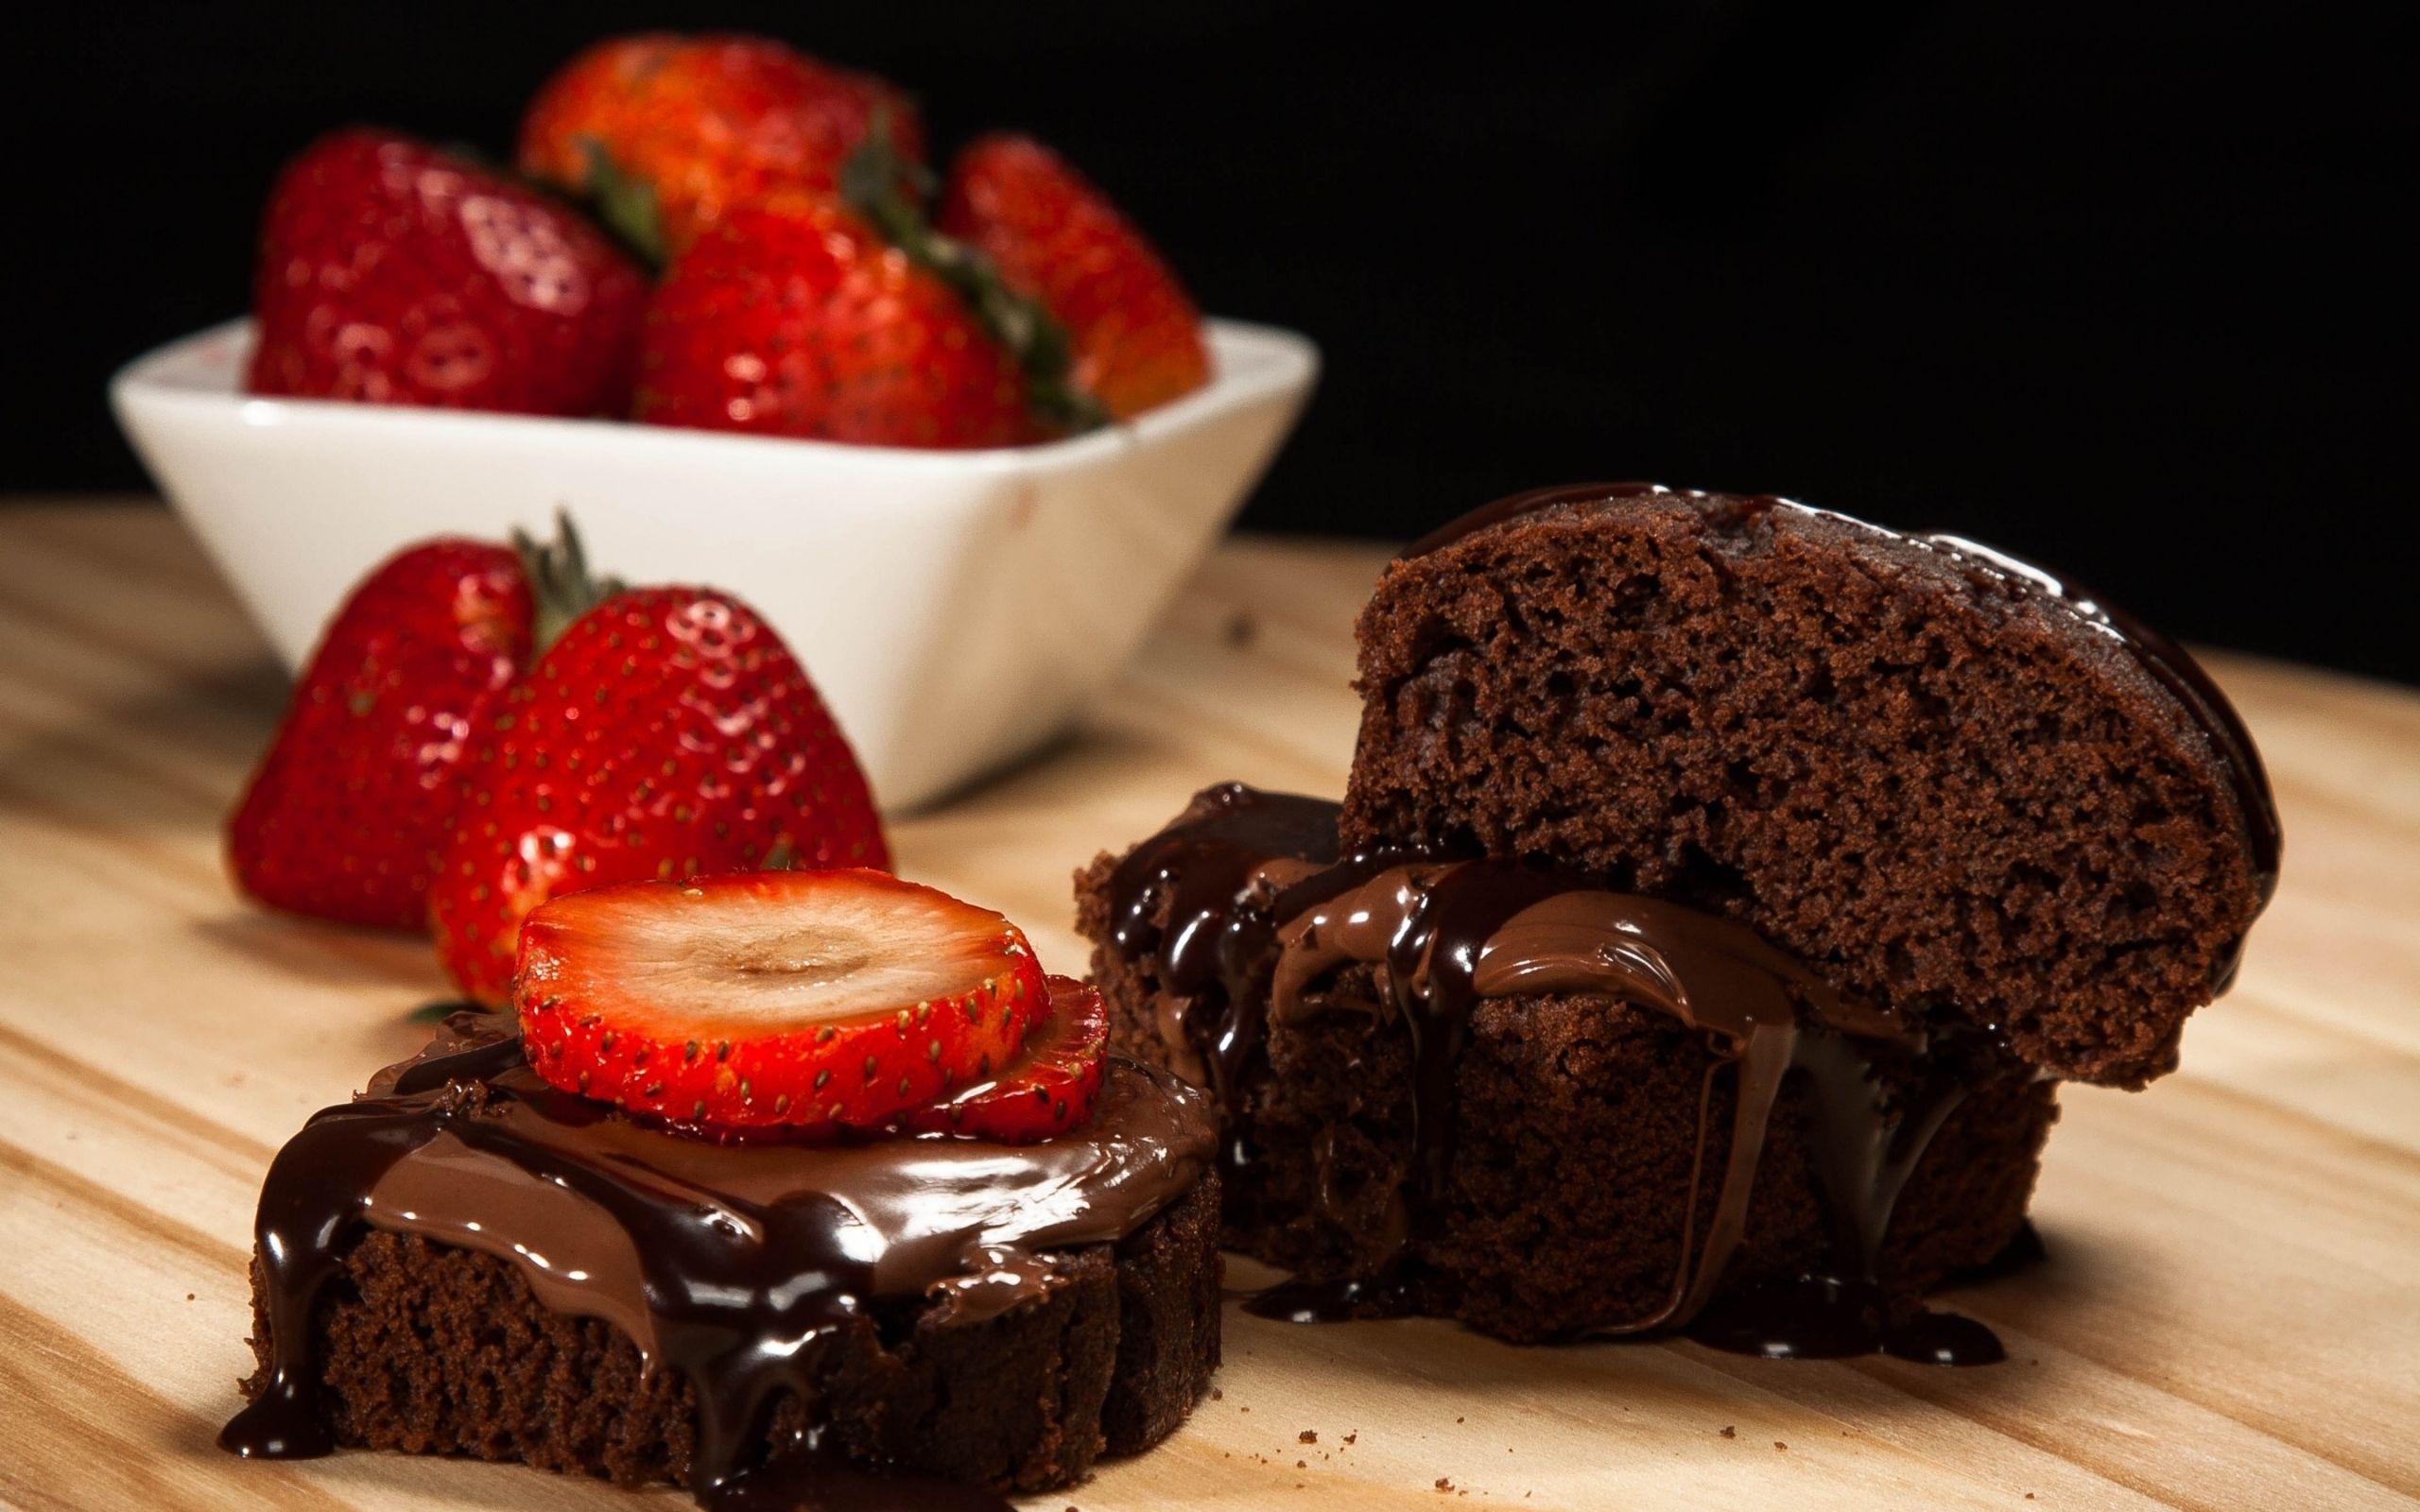 Dark Chocolate Cakes and Strawberries widescreen wallpaper. Wide